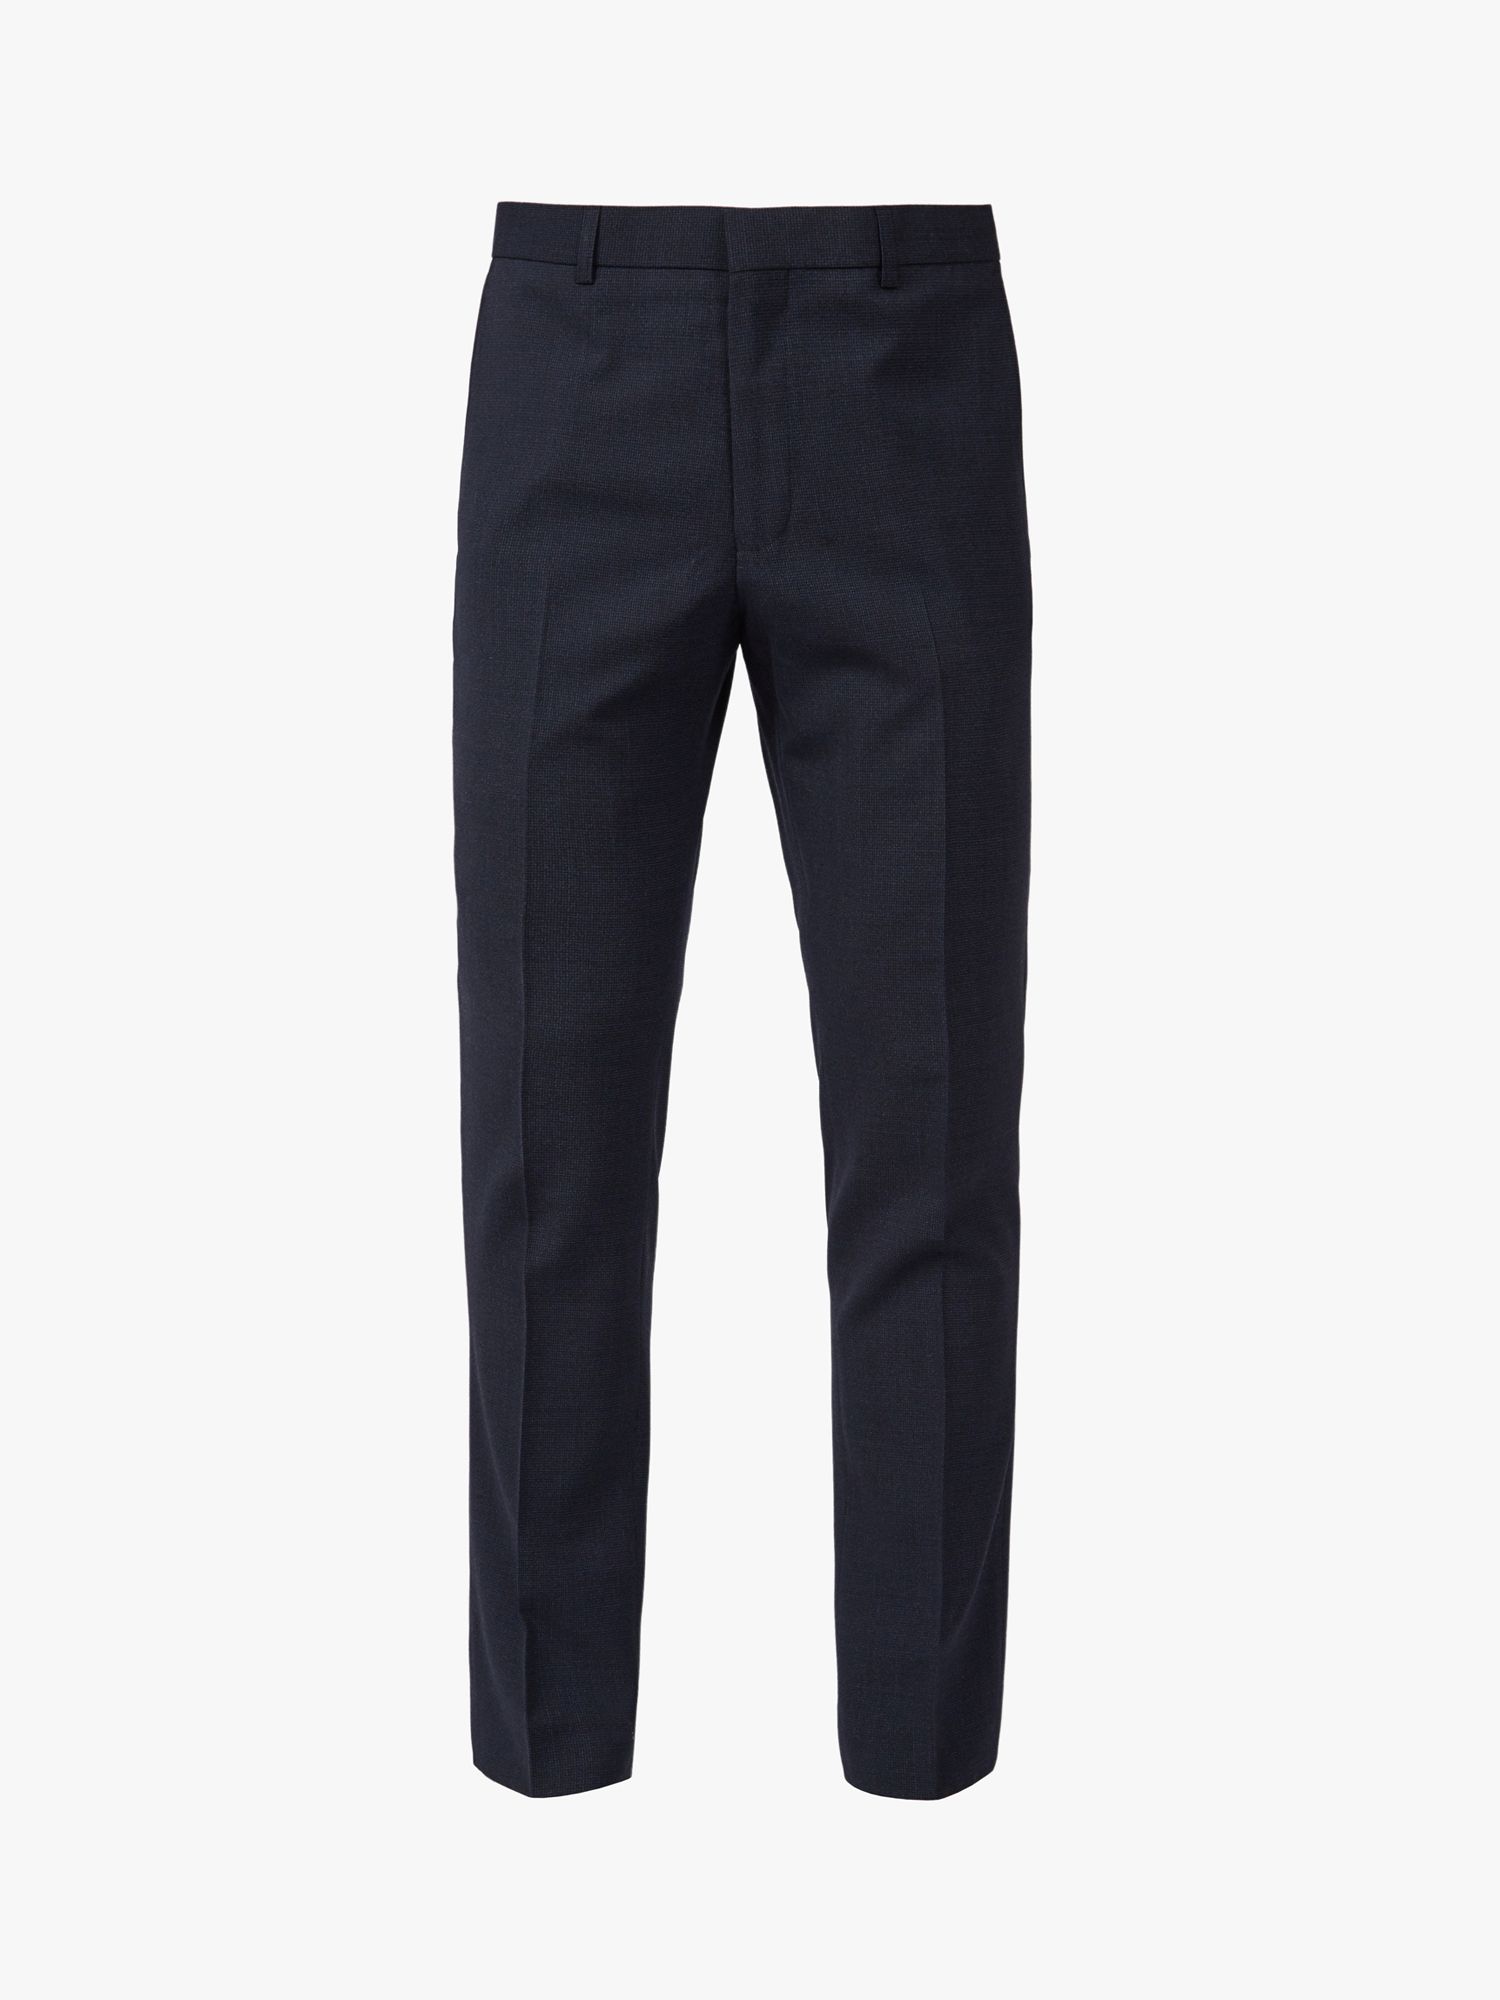 Ted Baker Formby Wool Blend Puppytooth Suit Trousers, Navy at John ...